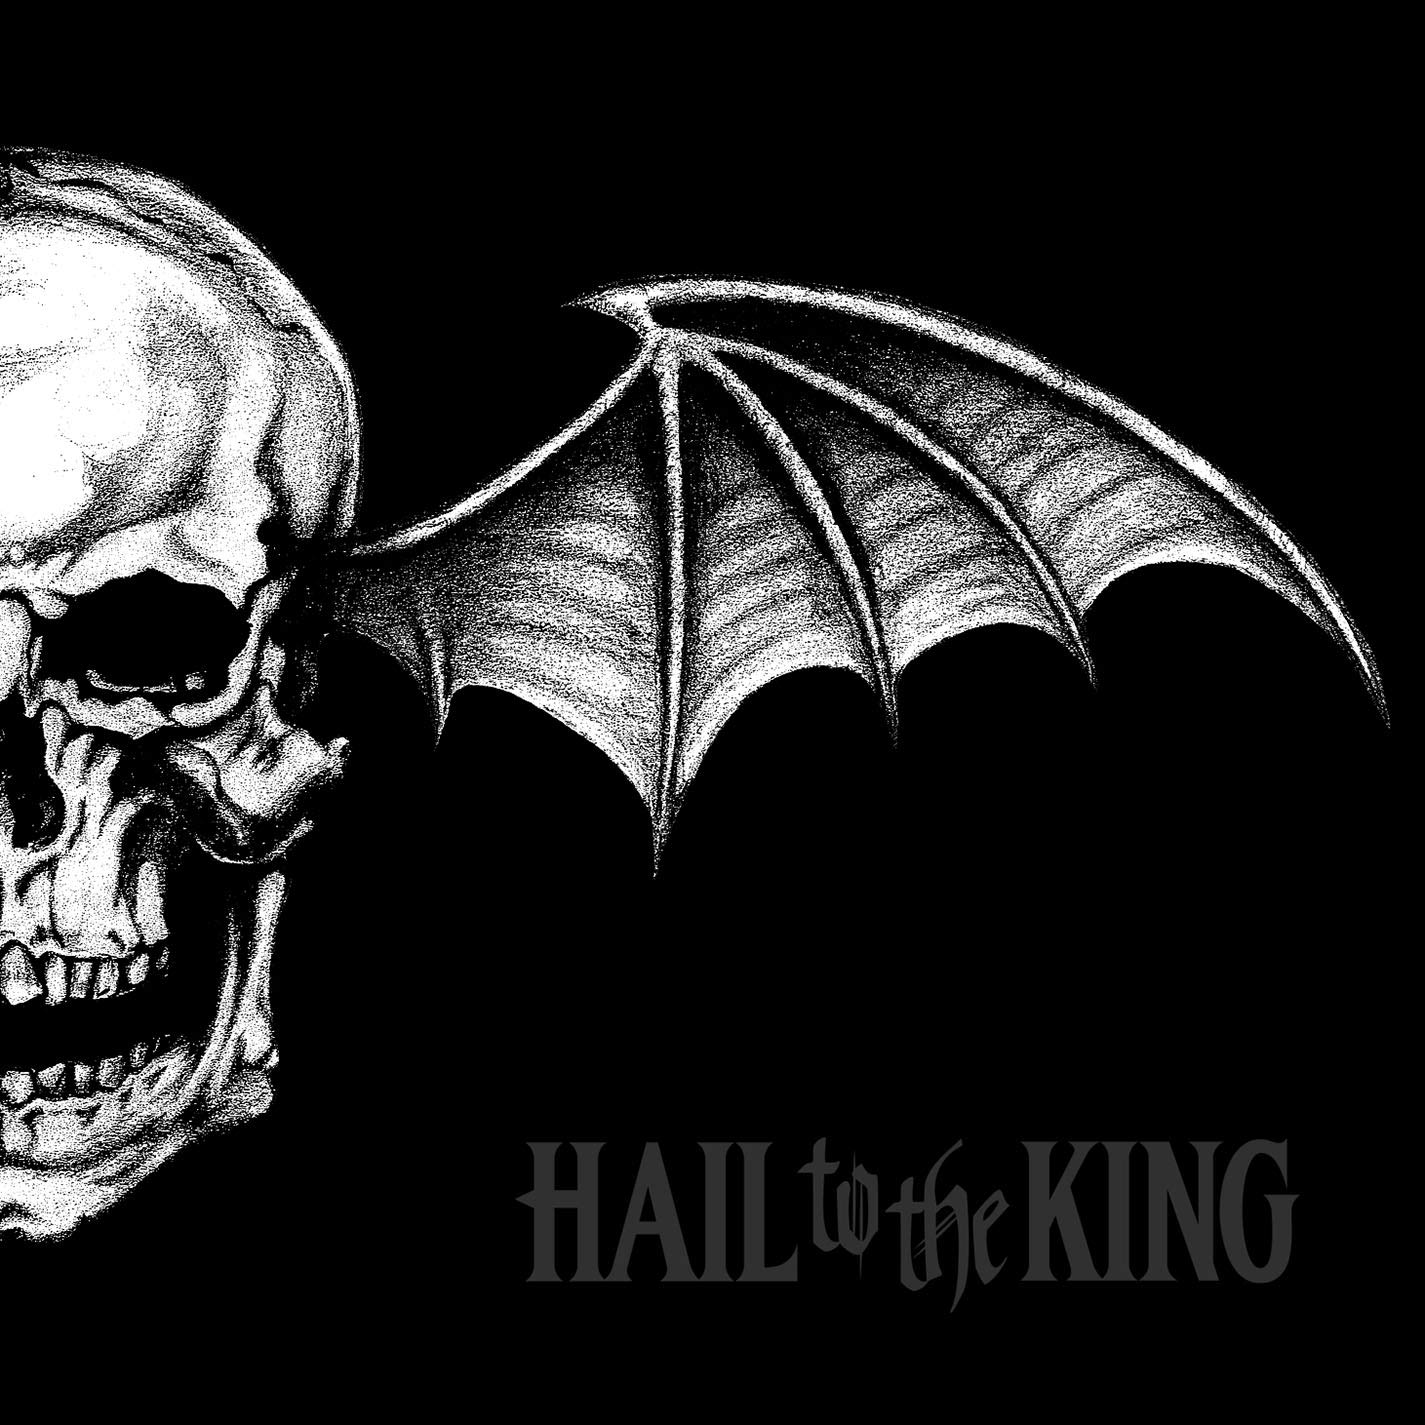 Hail To The King - Avenged Sevenfold Hail To The King Spotify - HD Wallpaper 